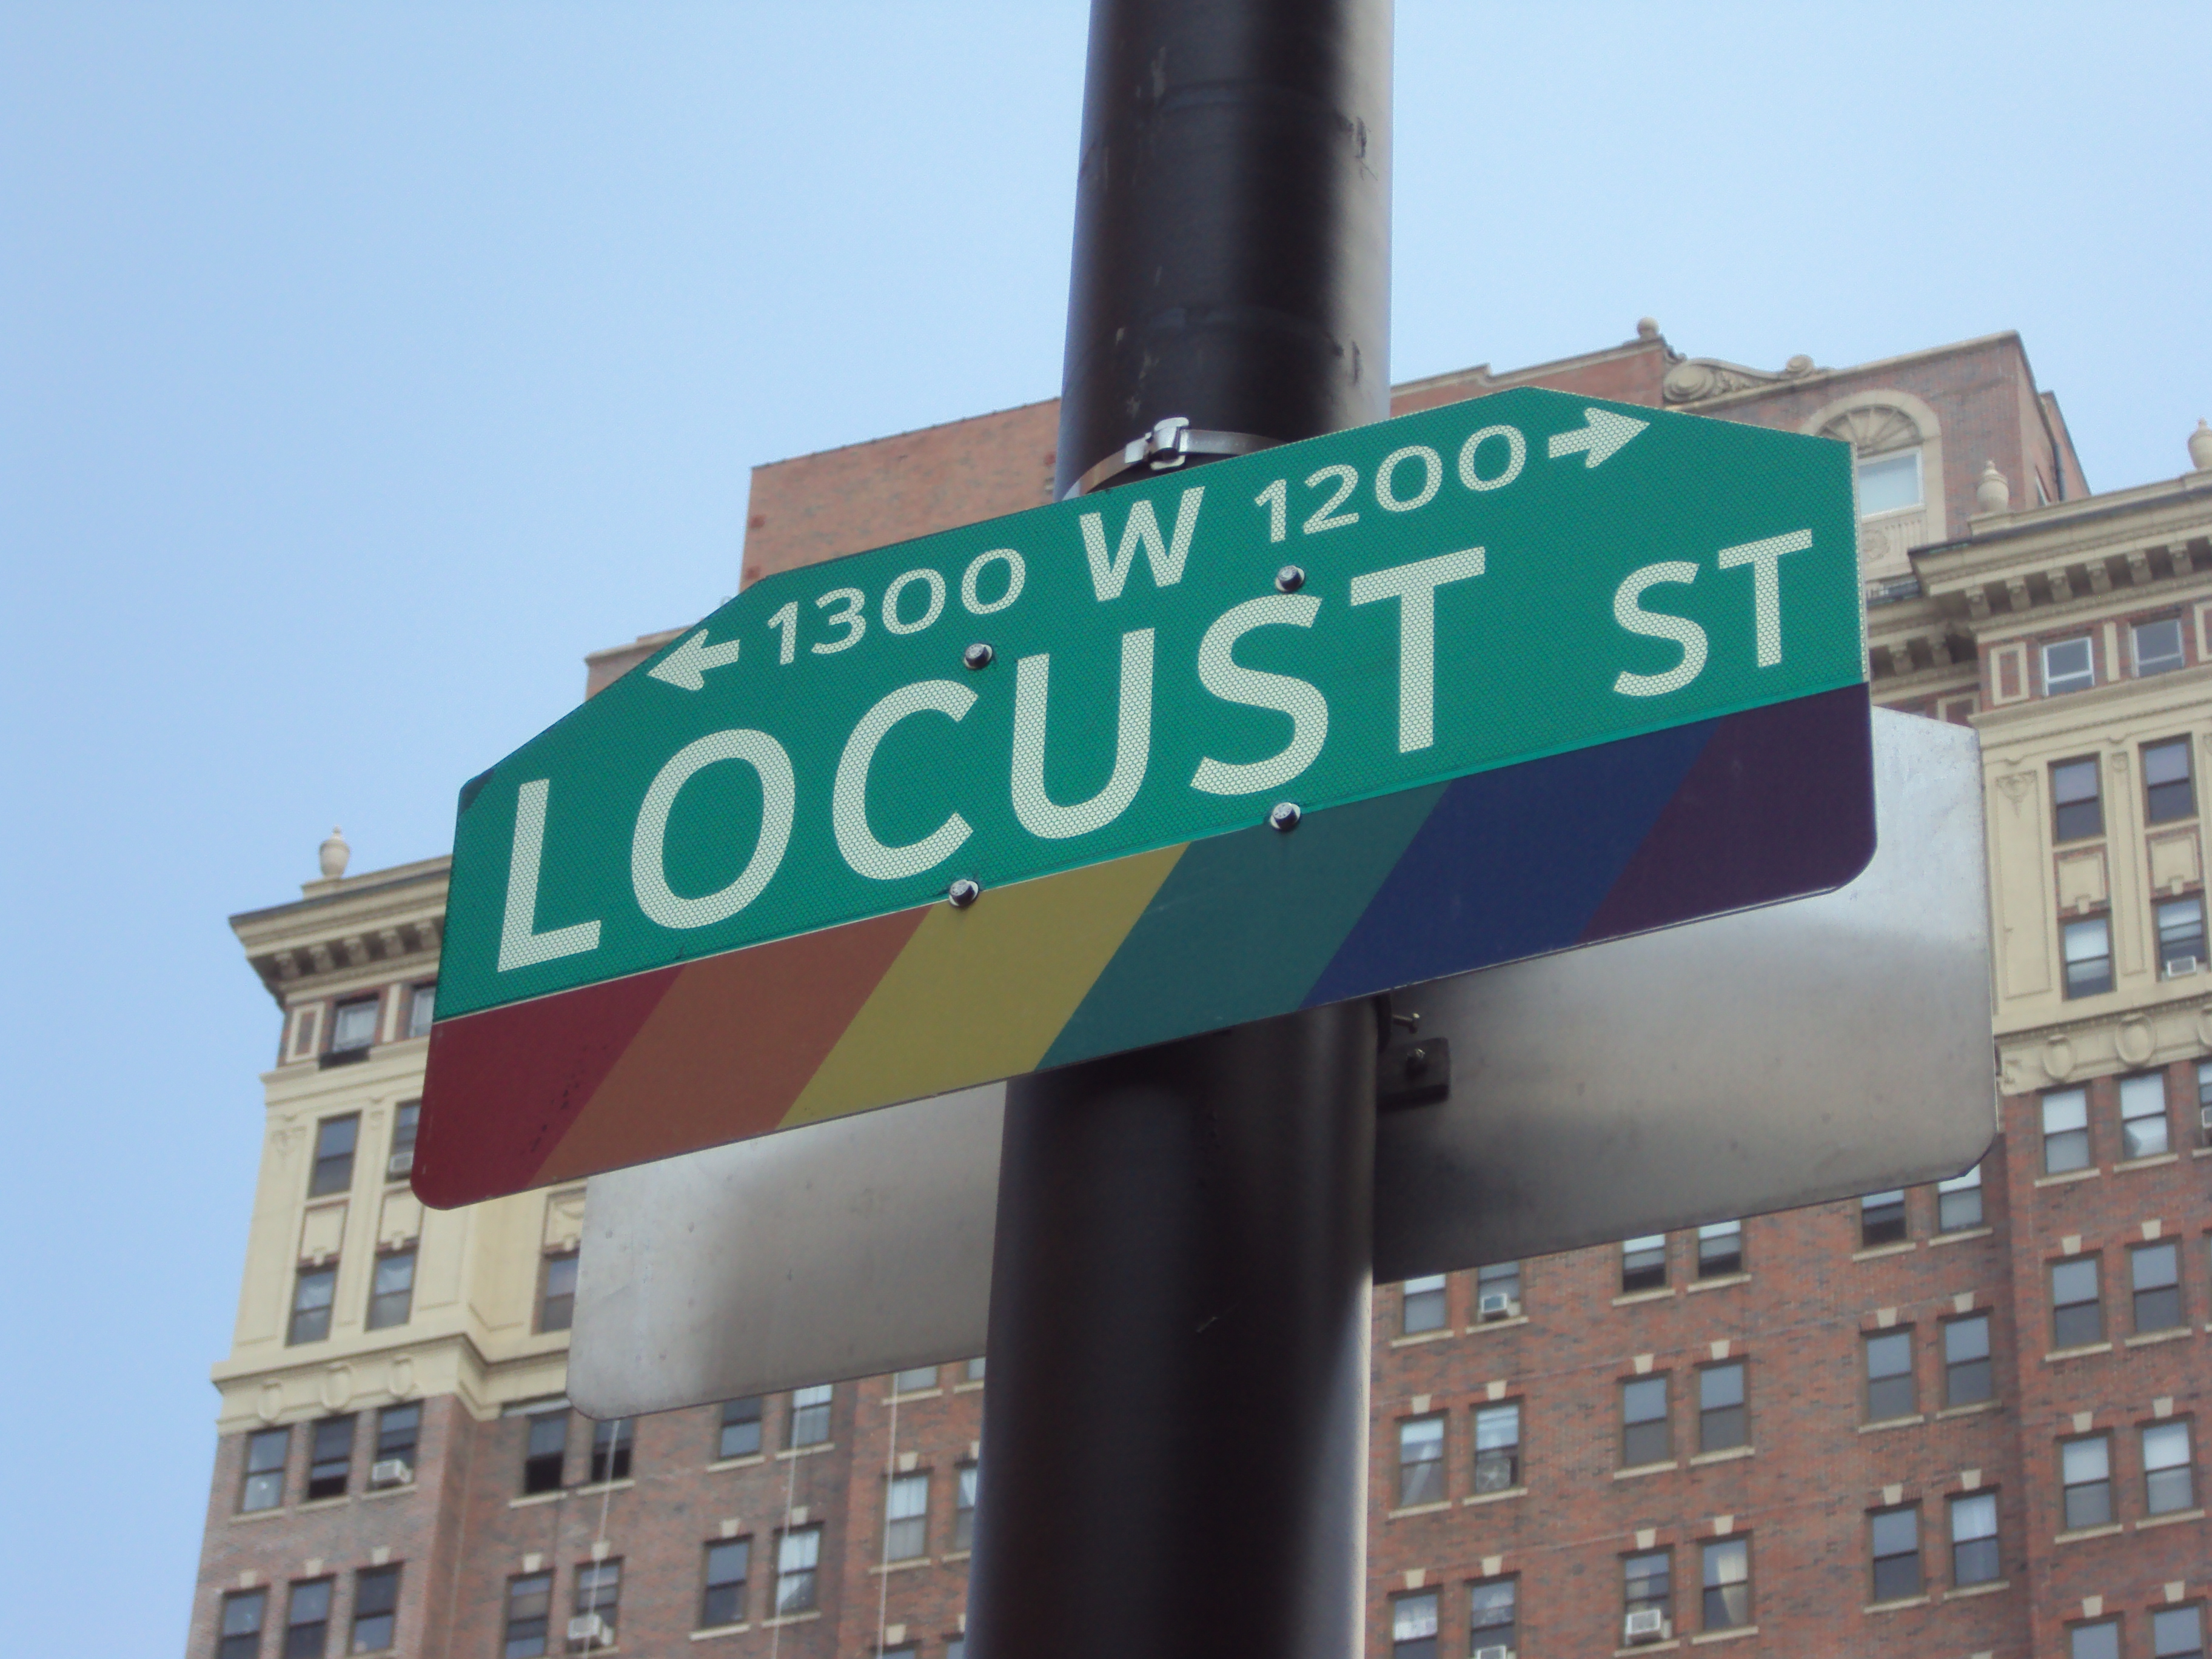 A color photograph of a street sign for Locust Street on a black pole. The green sign with white letters has an additional rainbow colored section on the bottom.